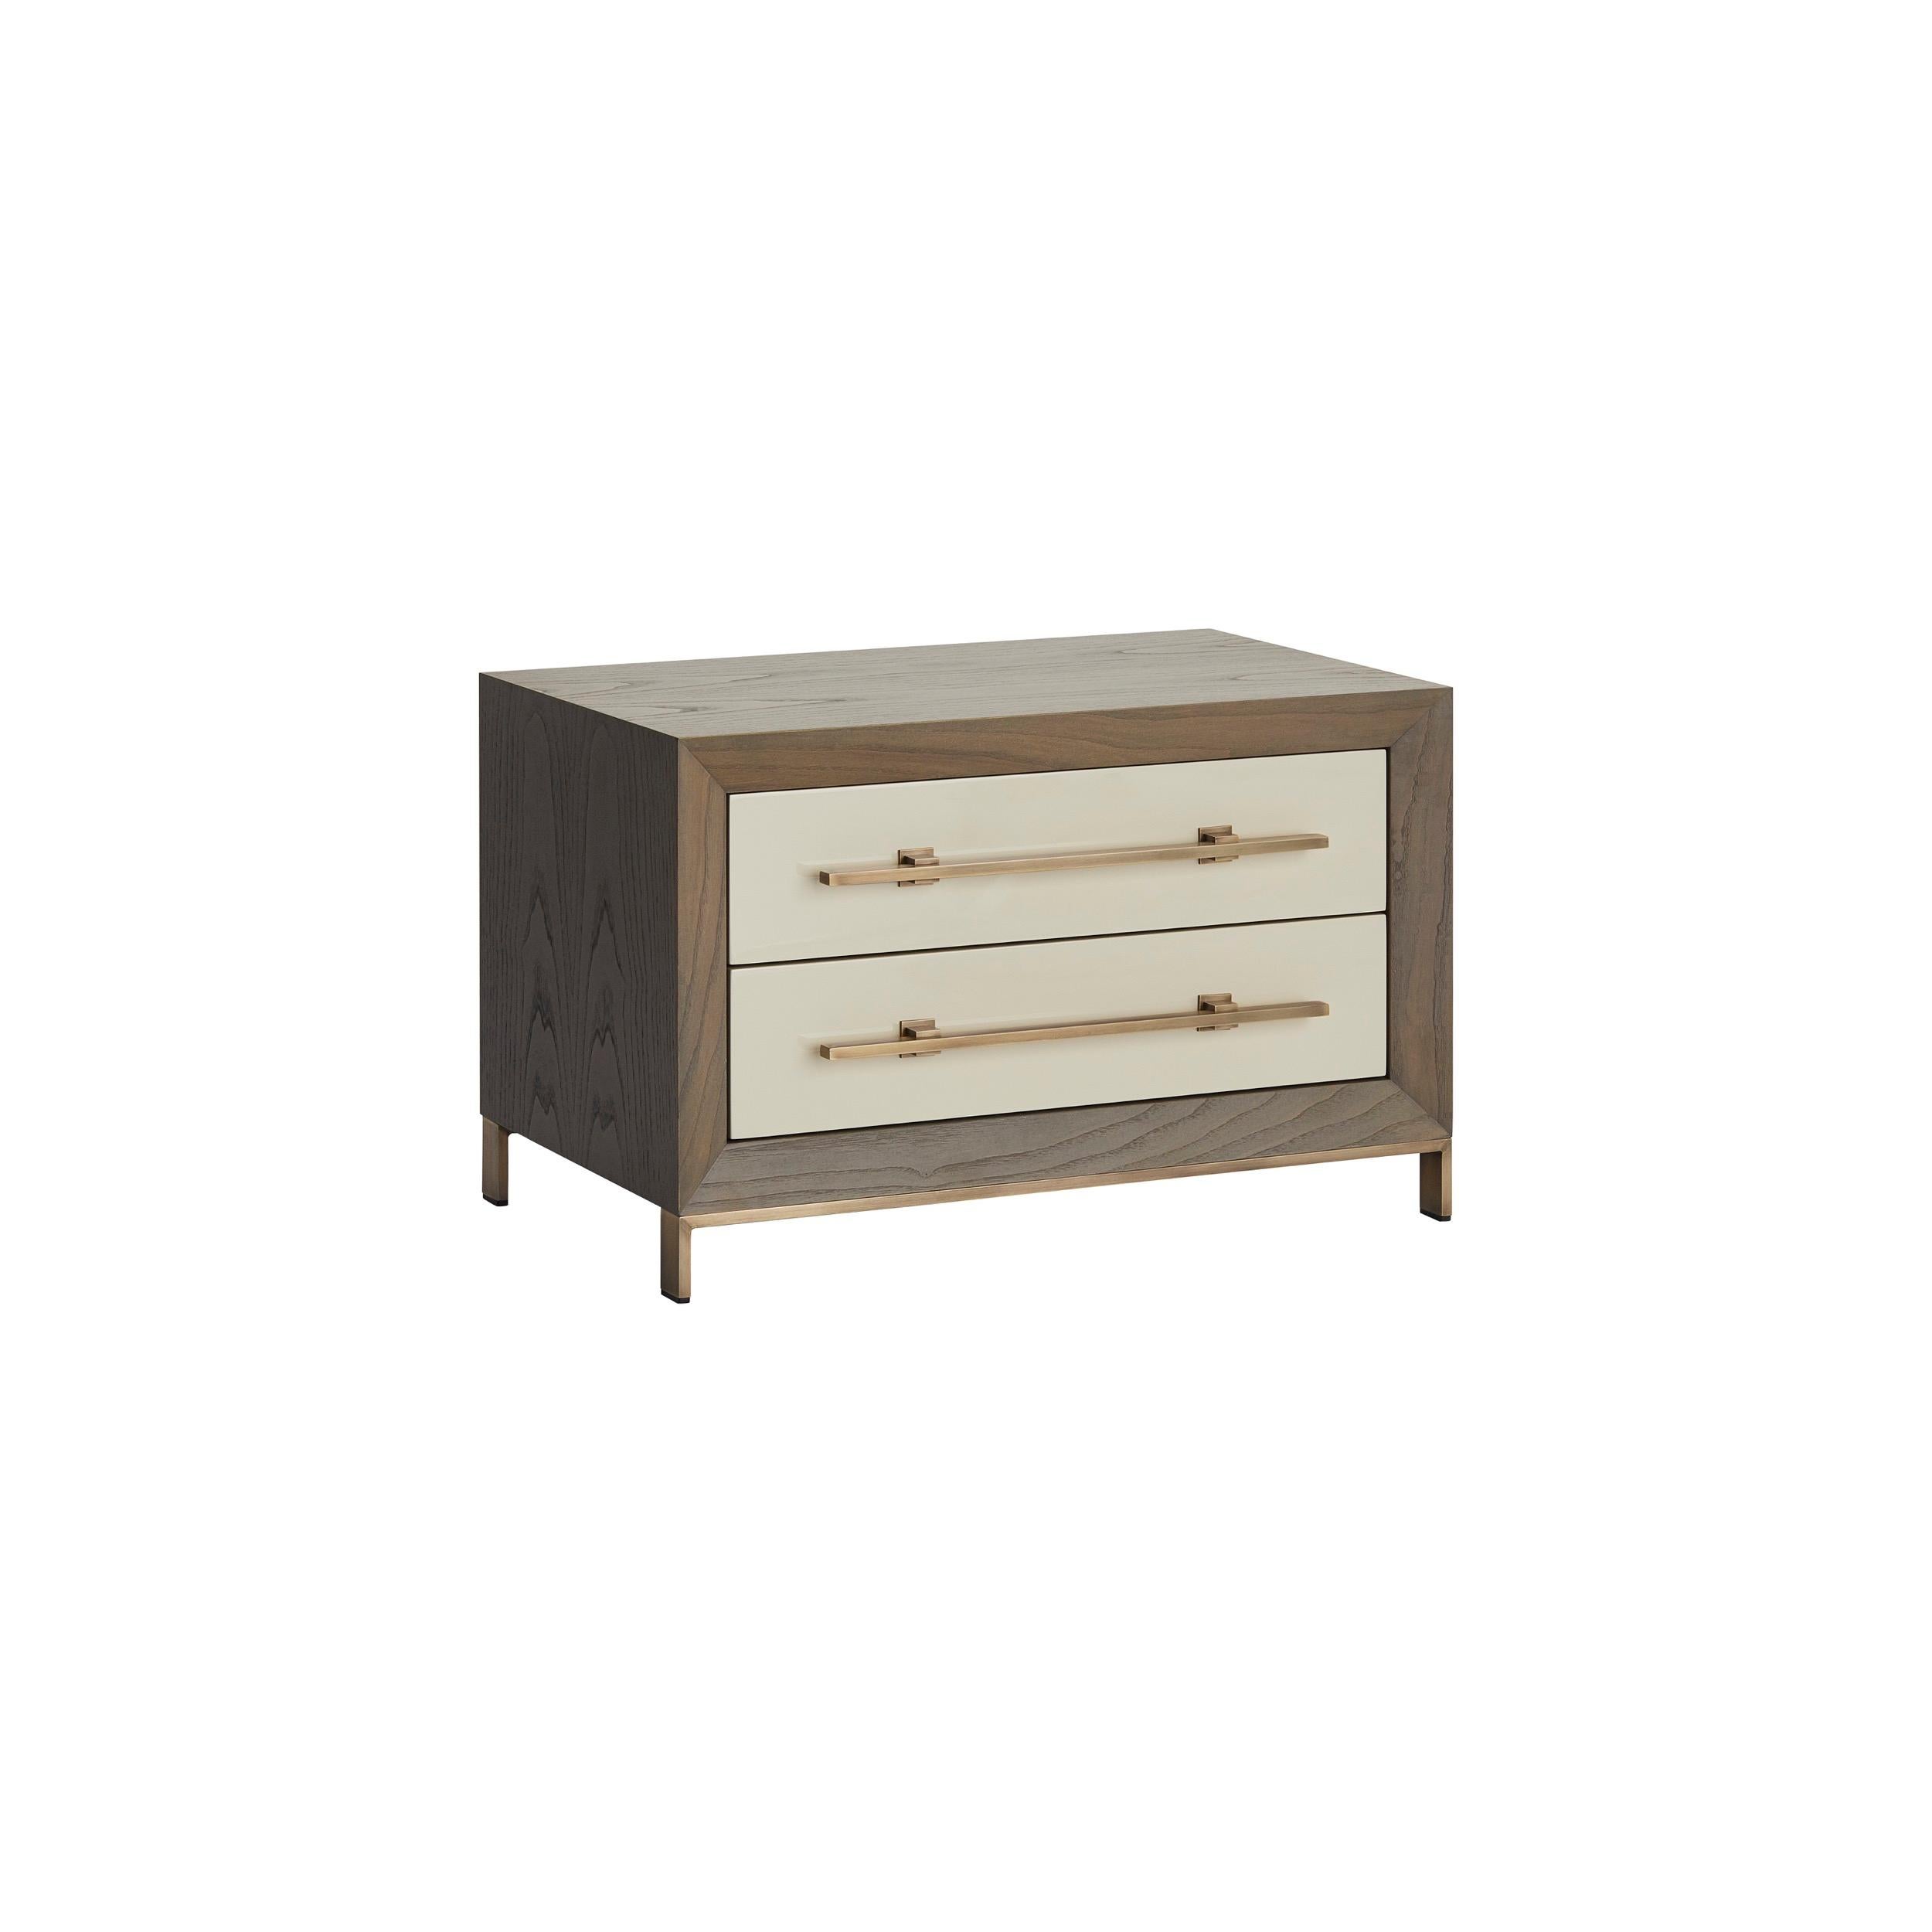 MAGNA is a robust and elegant nightstand, made of veneered wood with two lacquered drawers and embellished with brass details.‎ 

Shown in Matte Chestnut Veneer structure and Matte lacquered drawers, combined with antique brass feet and